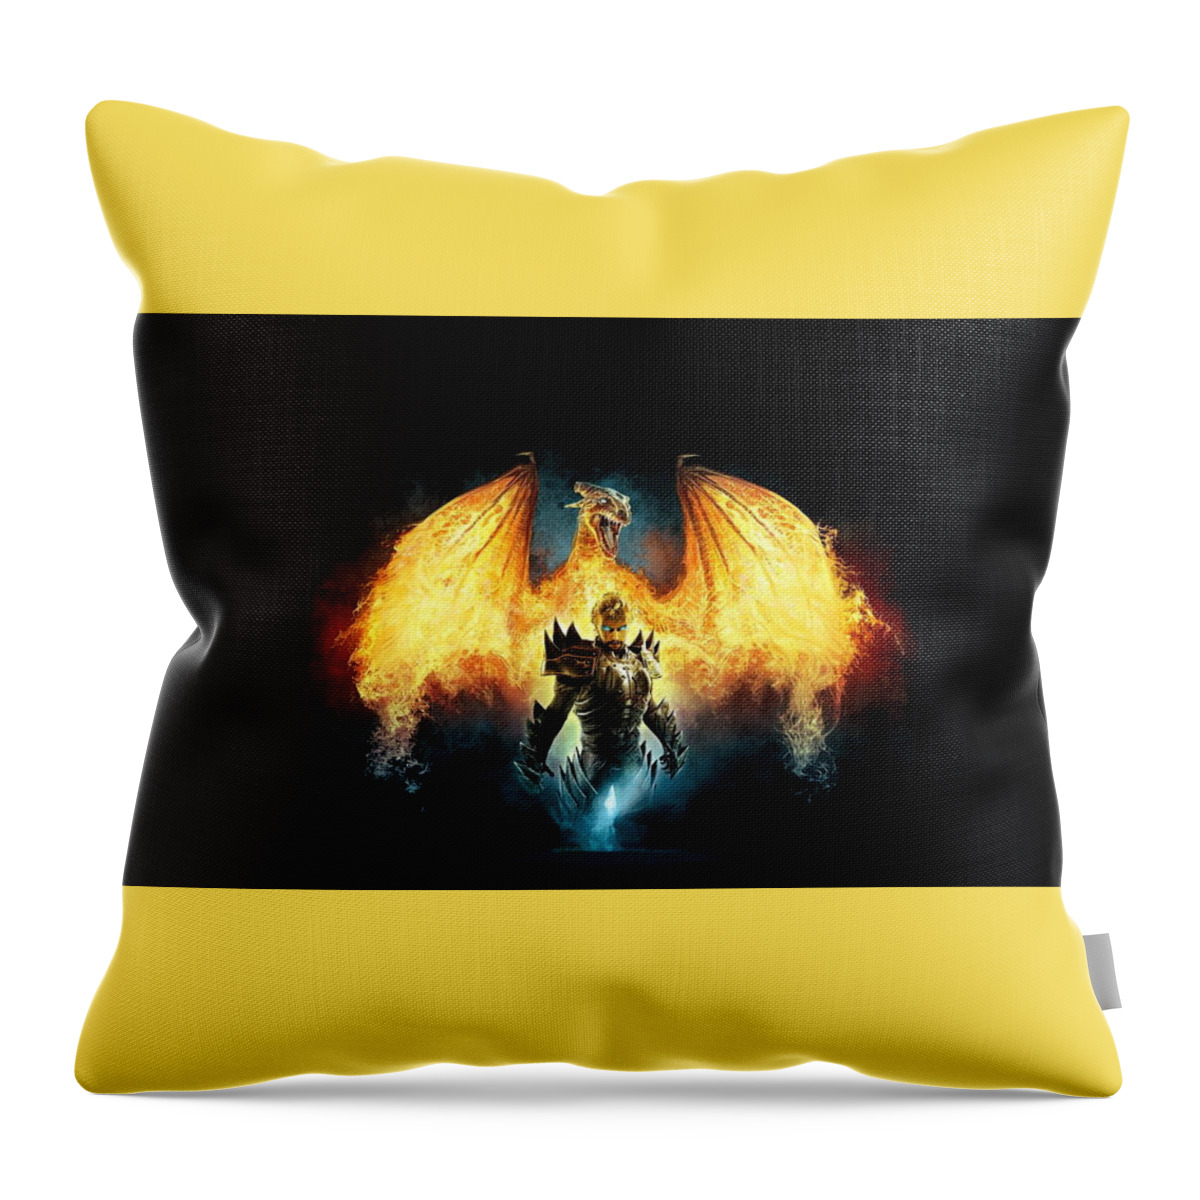 Divinity Ii Ego Draconis Throw Pillow featuring the digital art Divinity II Ego Draconis by Maye Loeser